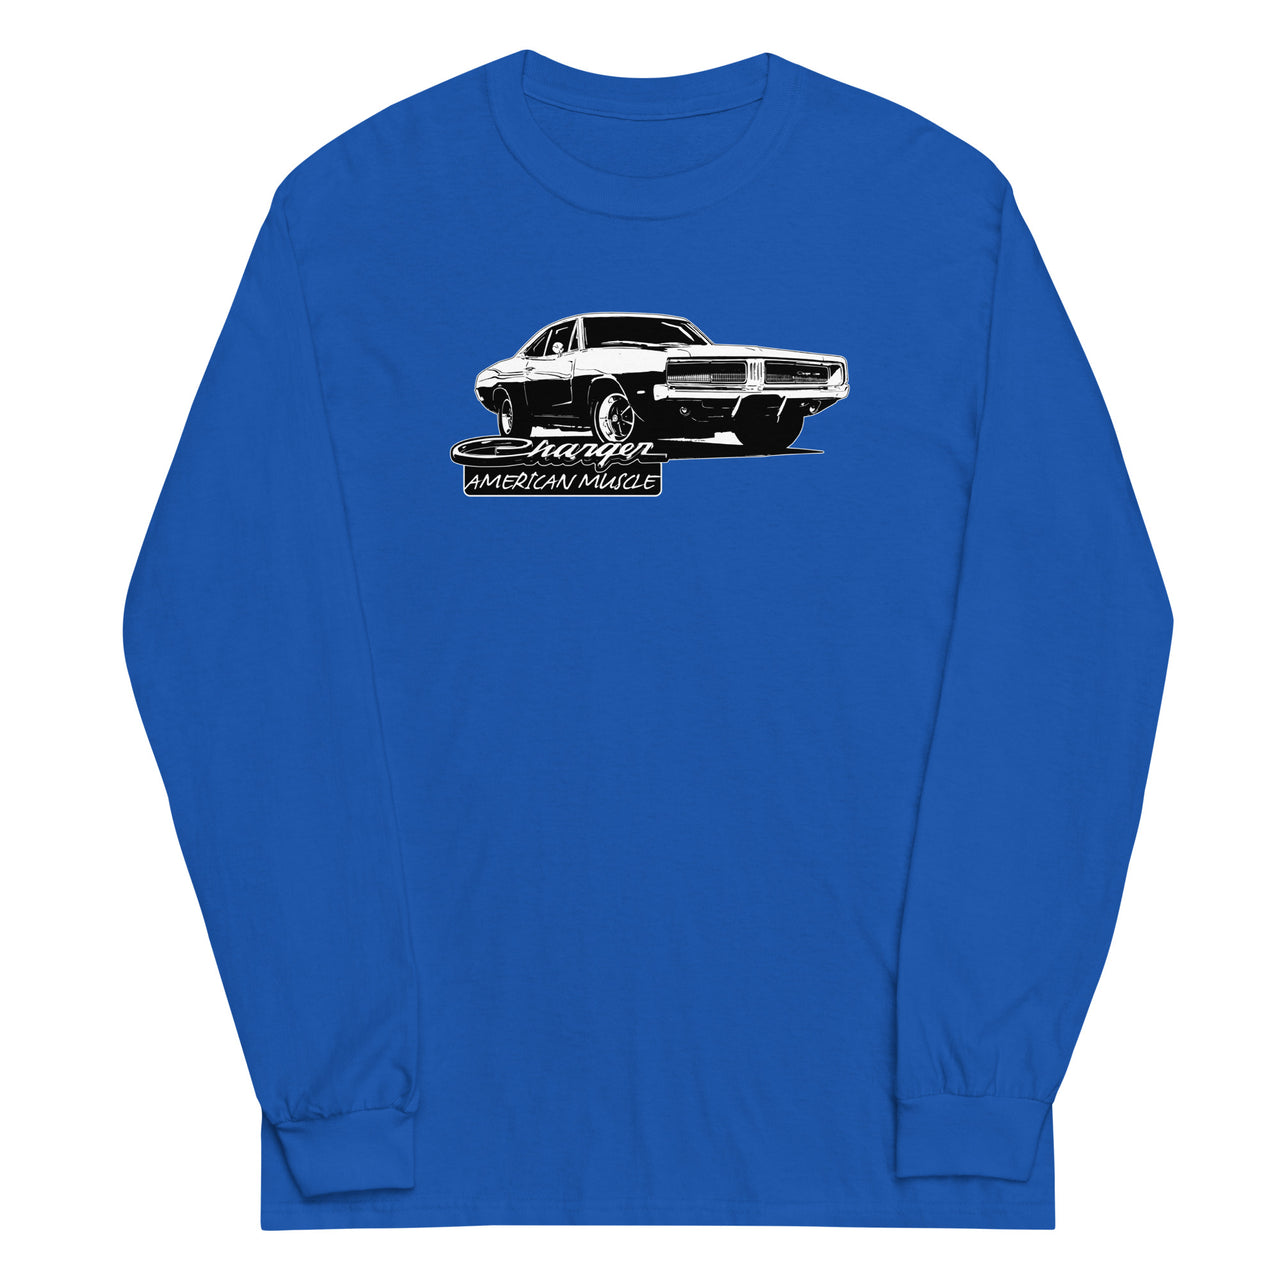 1969 Charger Long Sleeve Shirt in royal